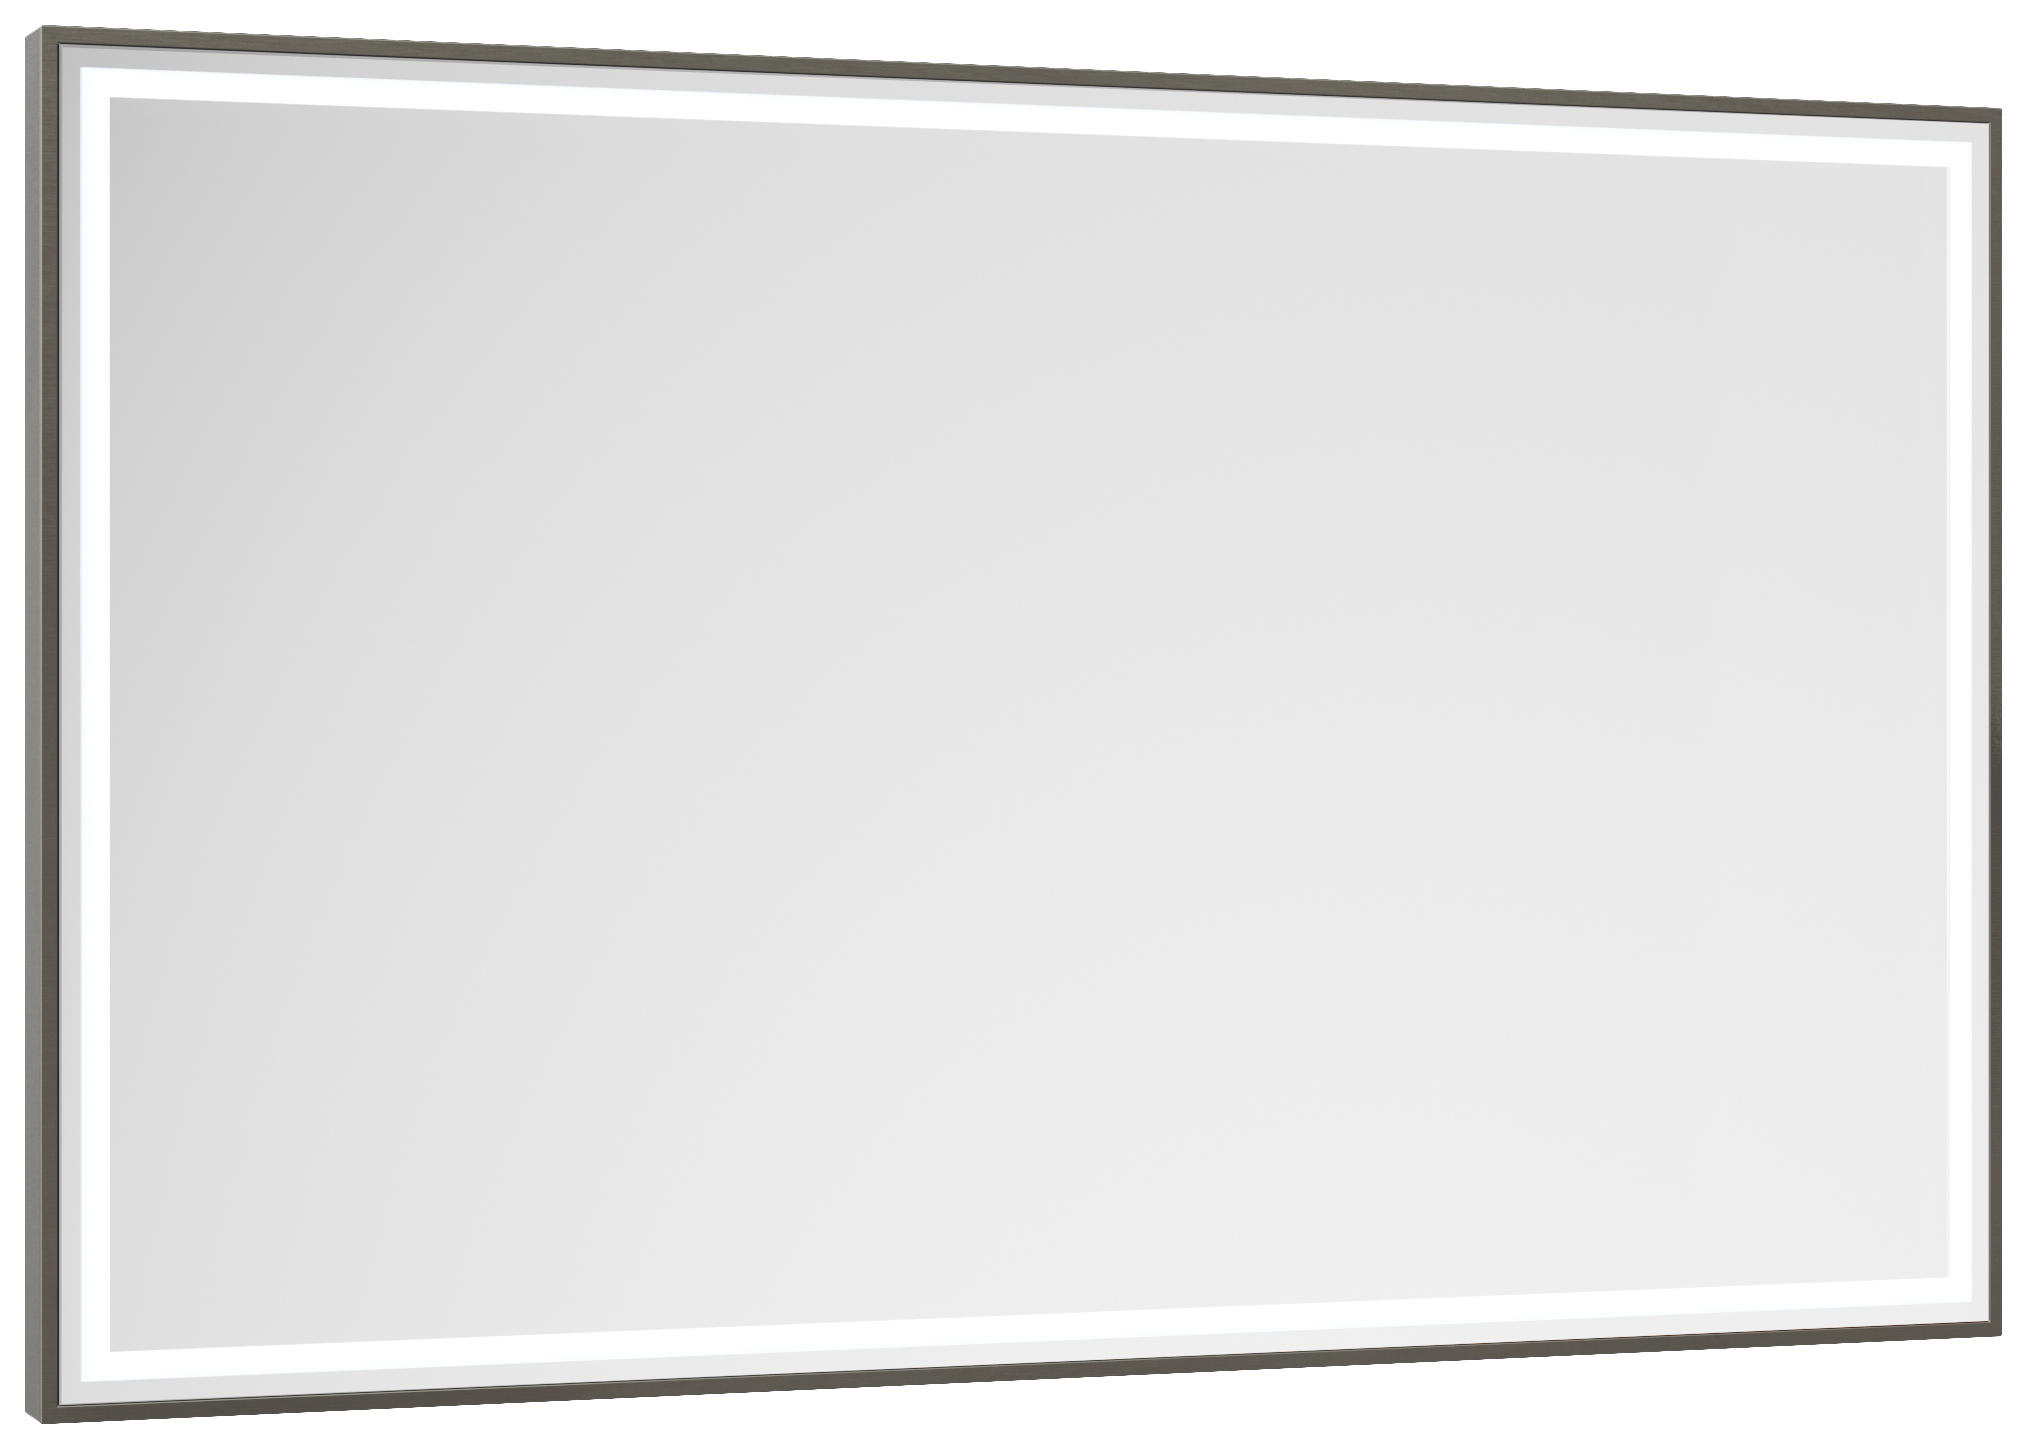 Abacus Melford Anthracite LED Mirror with Demister - 1200 x 600mm